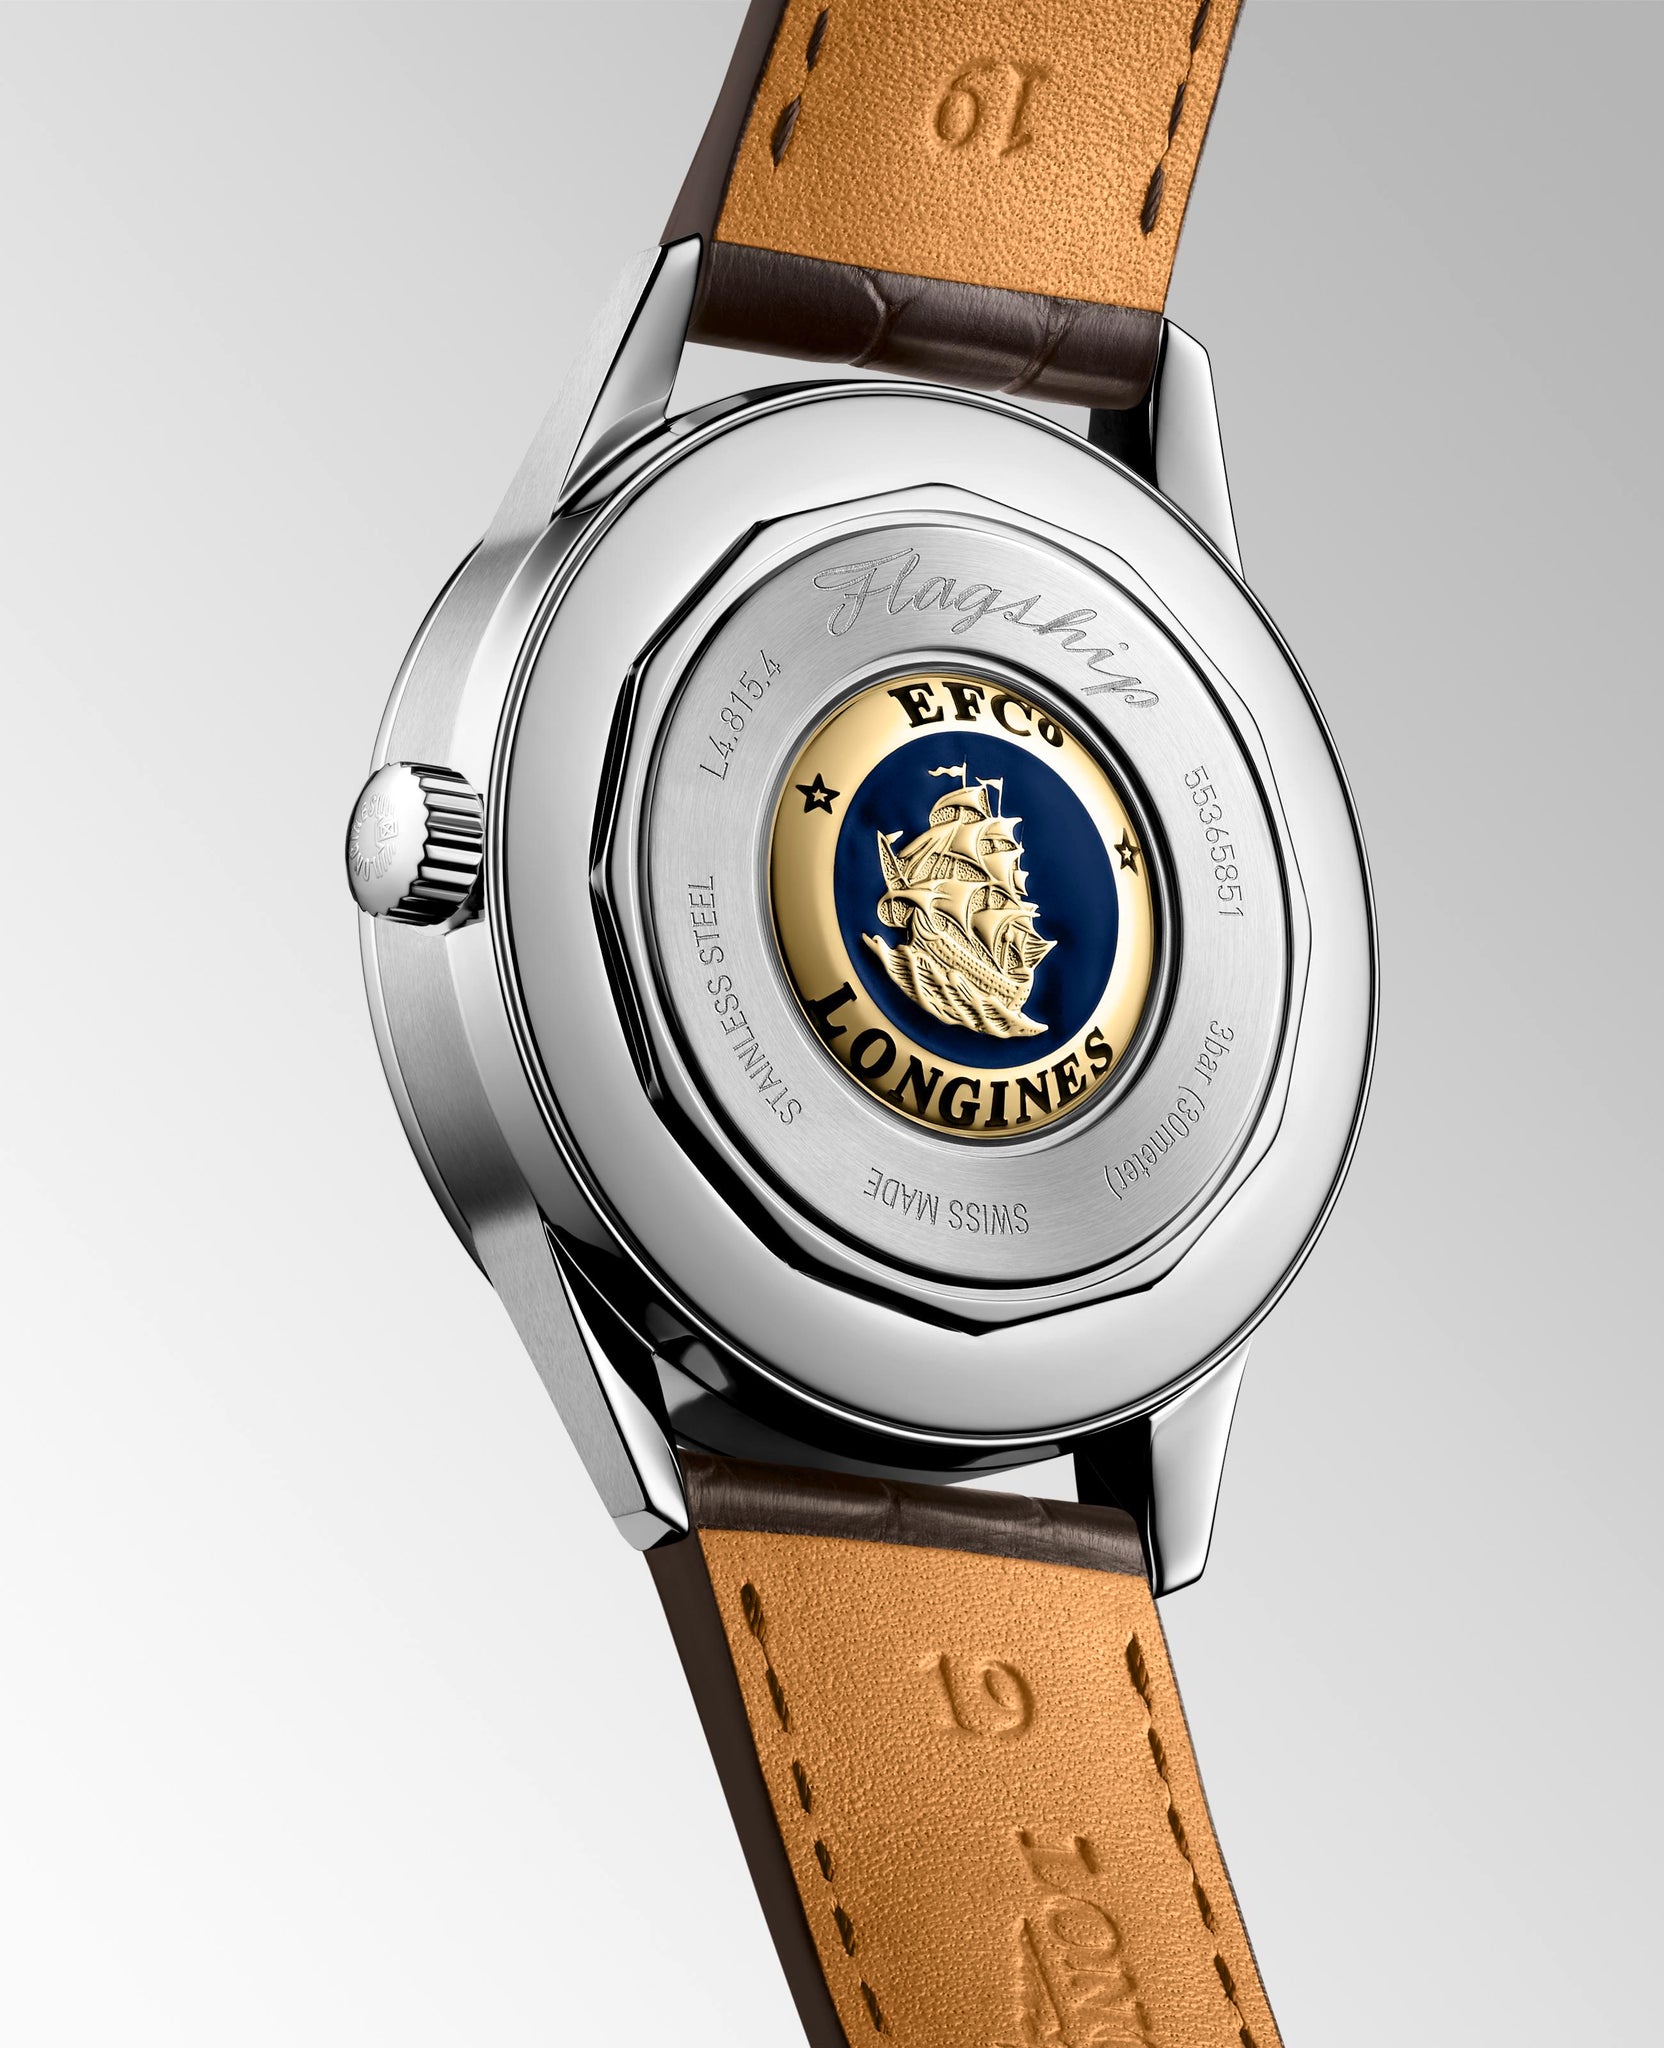 Longines Flagship Heritage Moonphase Automatic (Silver Dial / 38.5mm)